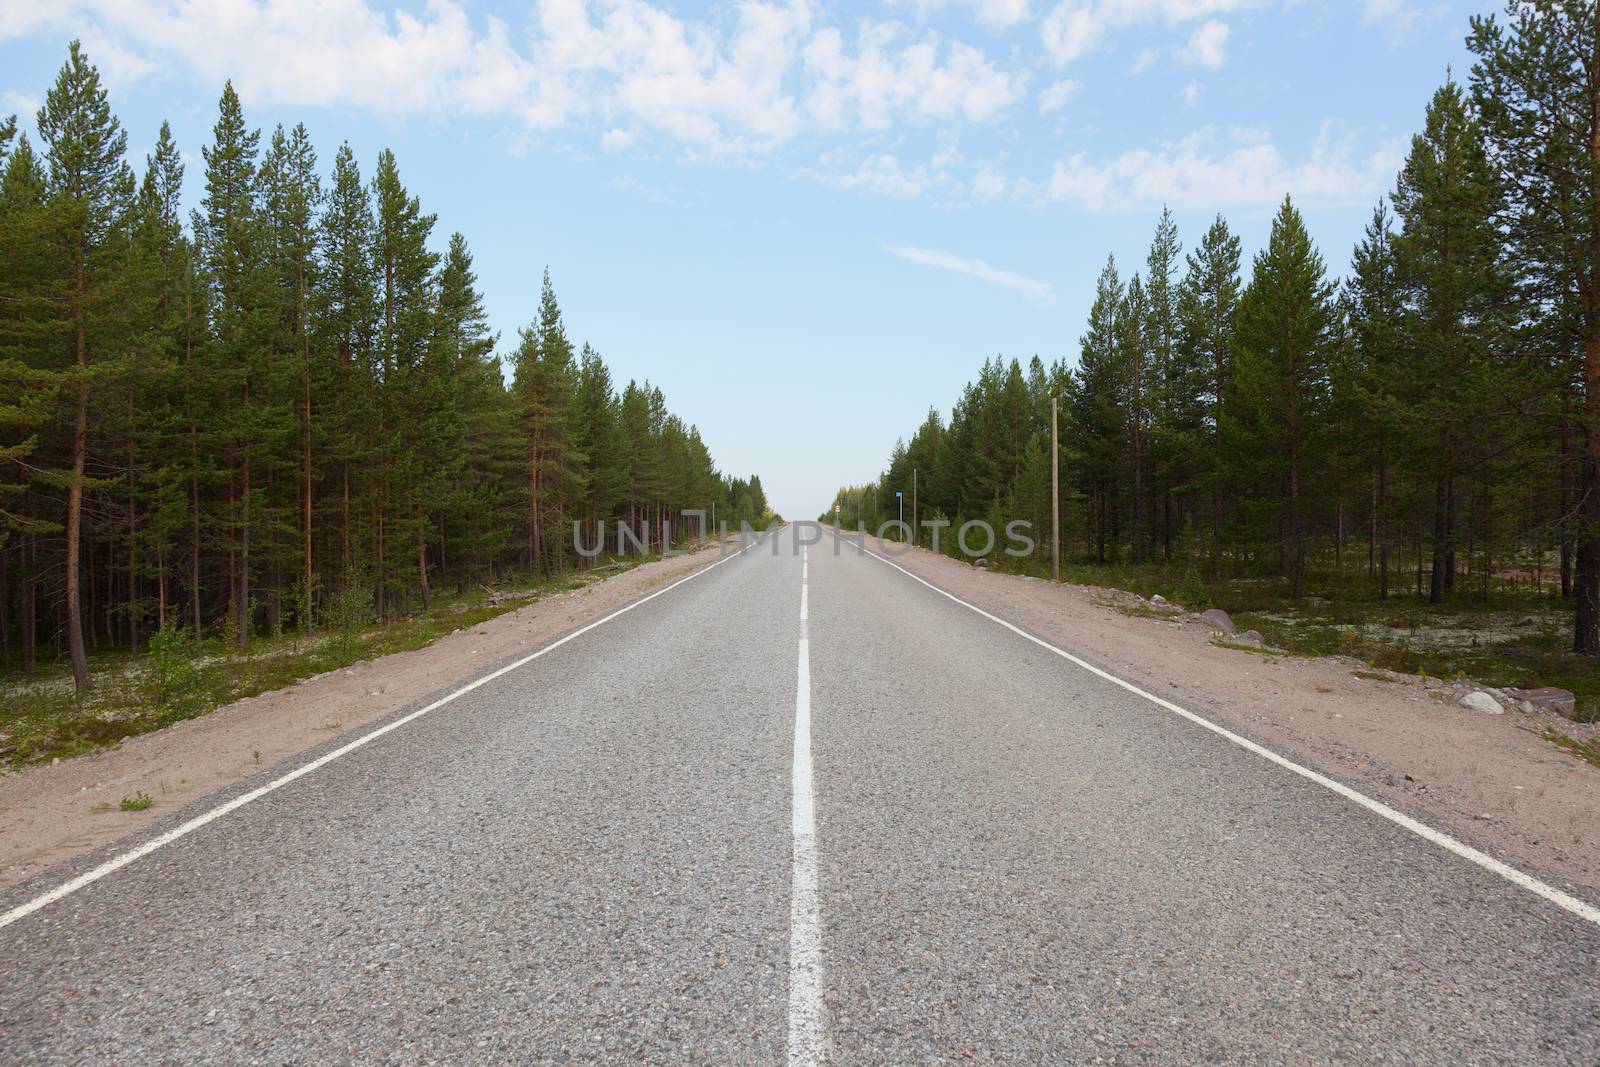 Long road stretching out into the distance under a blue sky. Road to Umba 